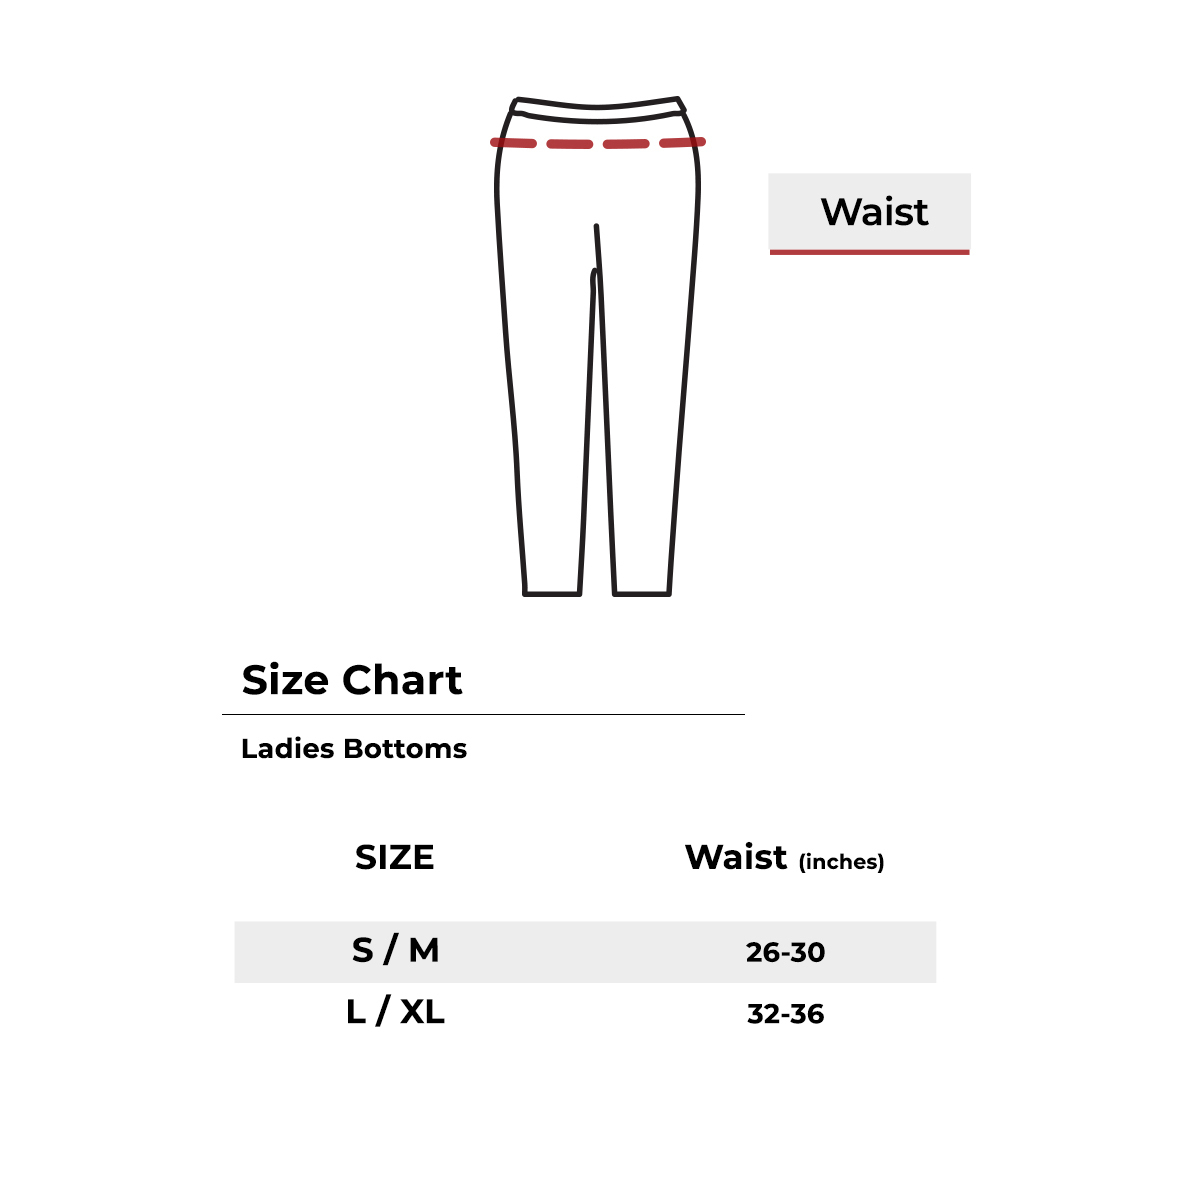 4-Pack Women's High Waisted Anti Cellulite Solid Leggings - L/XL